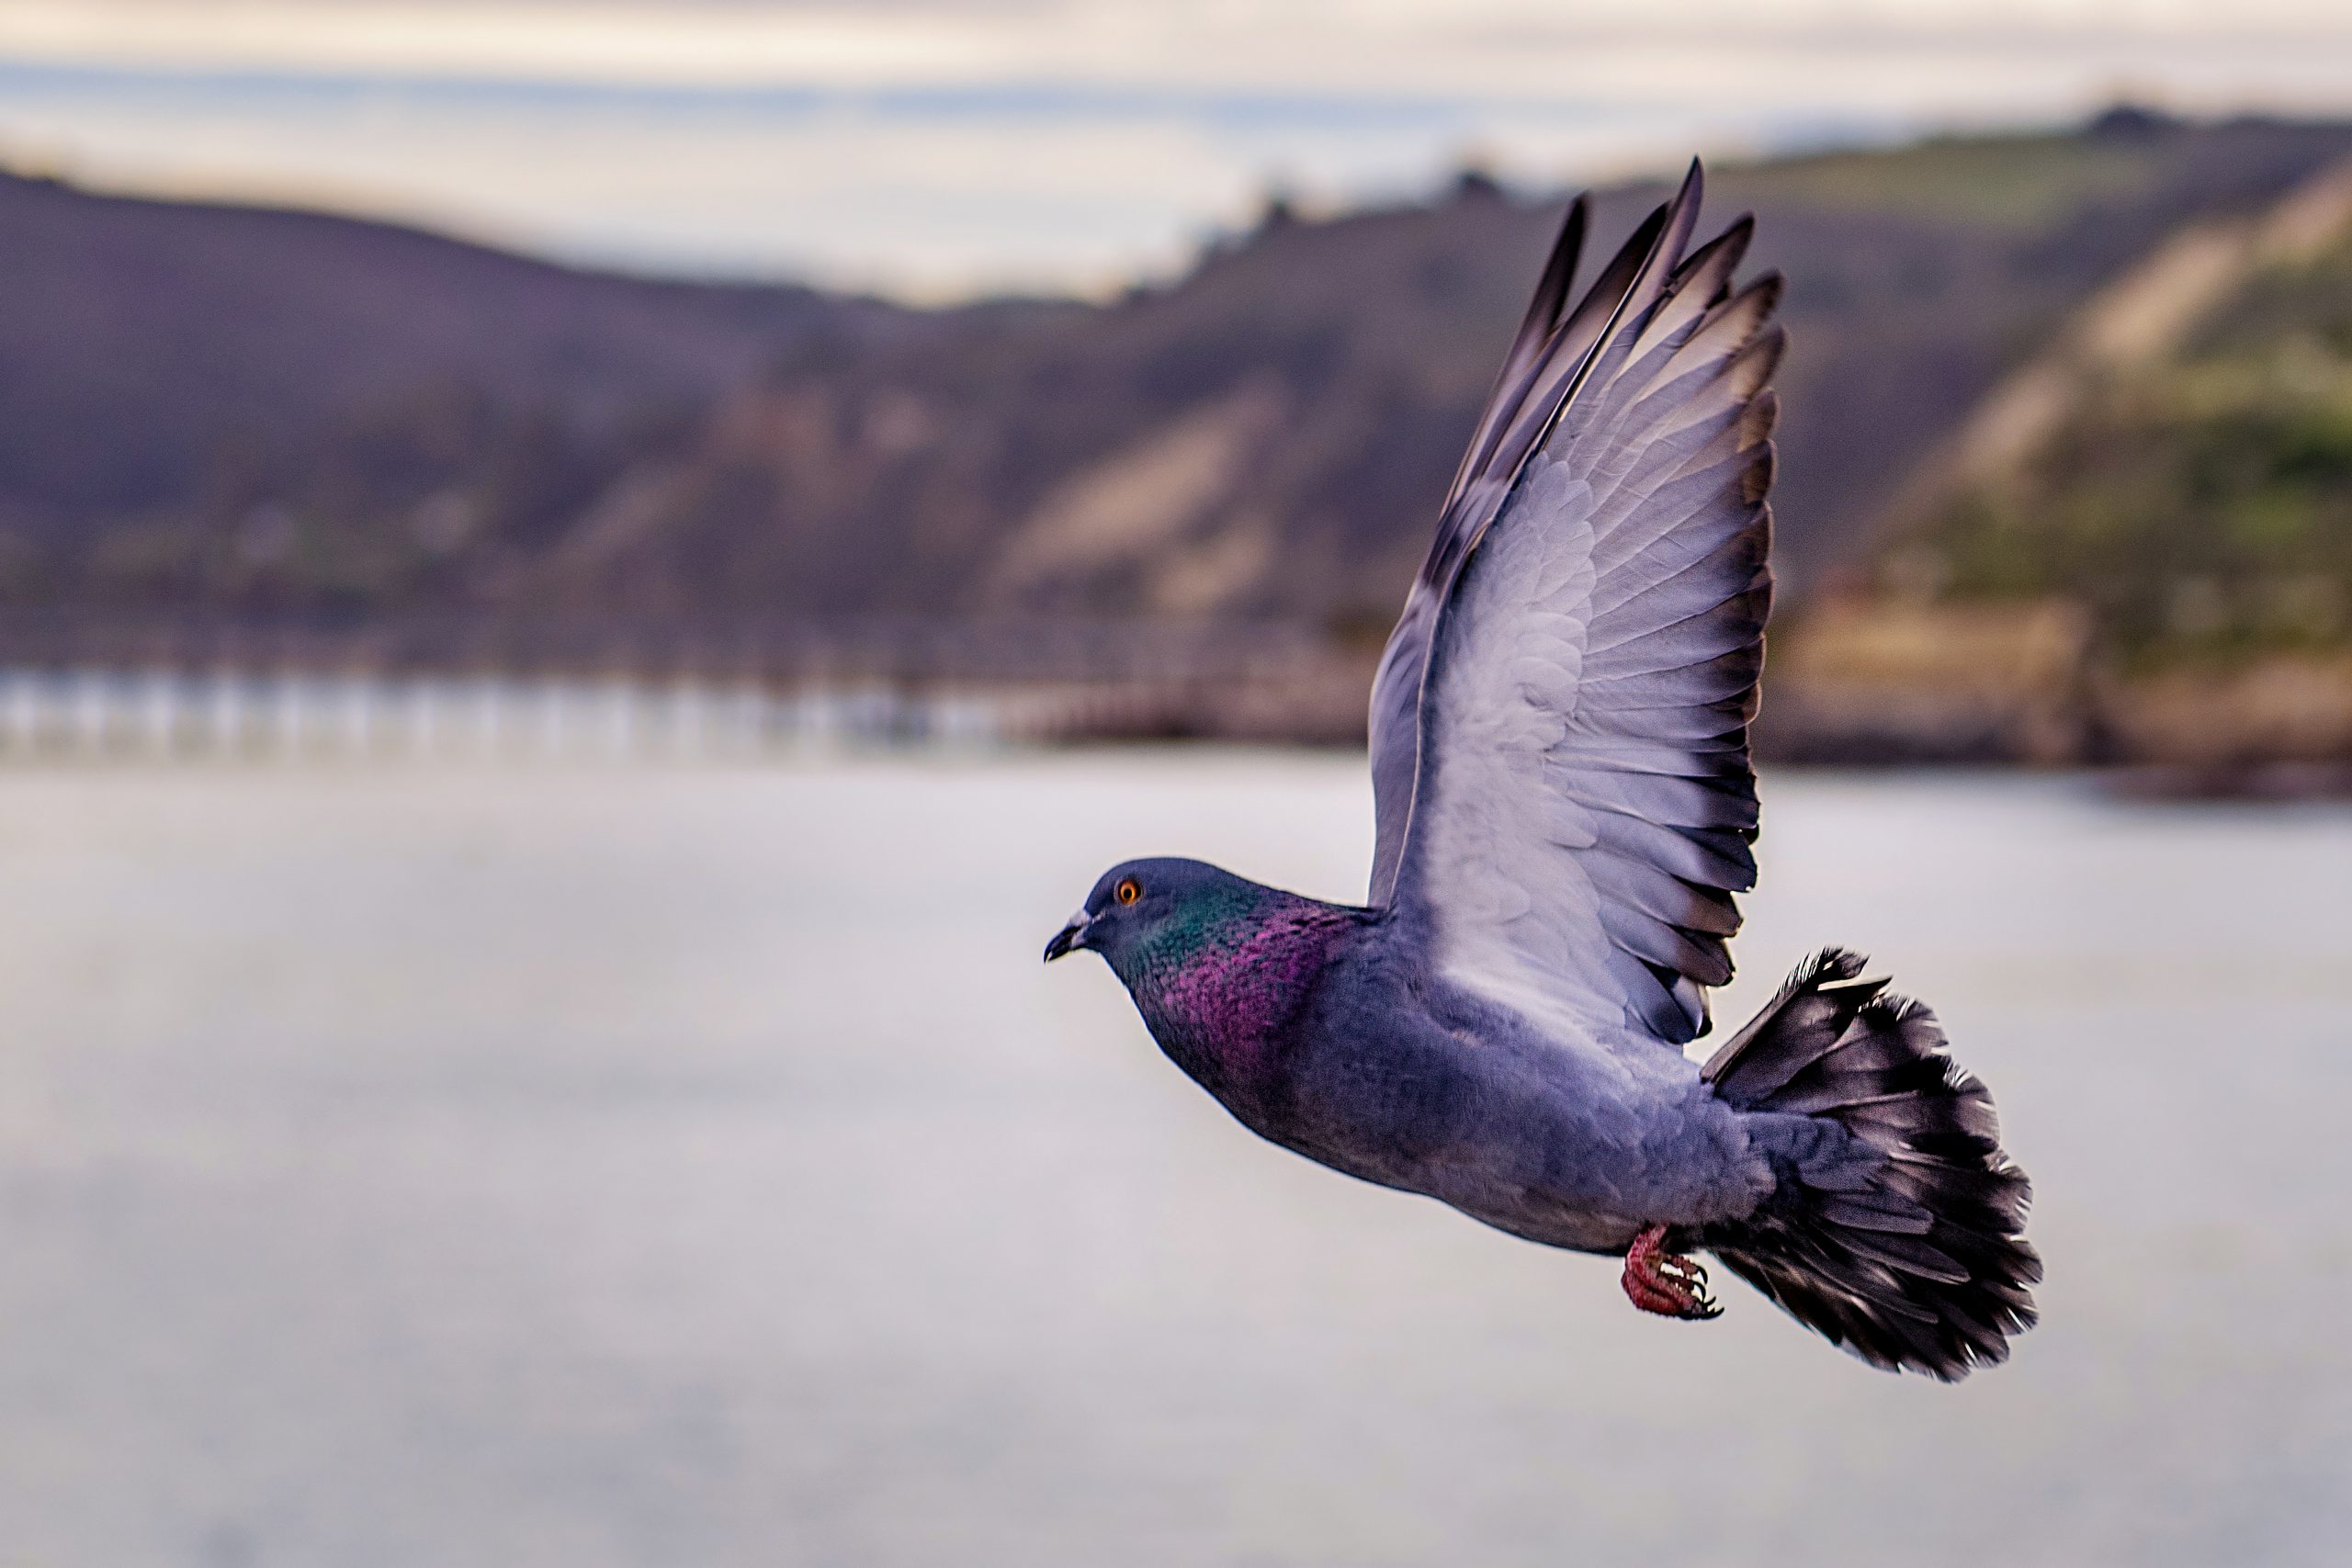 How Do You Get Rid of Pigeon Droppings?